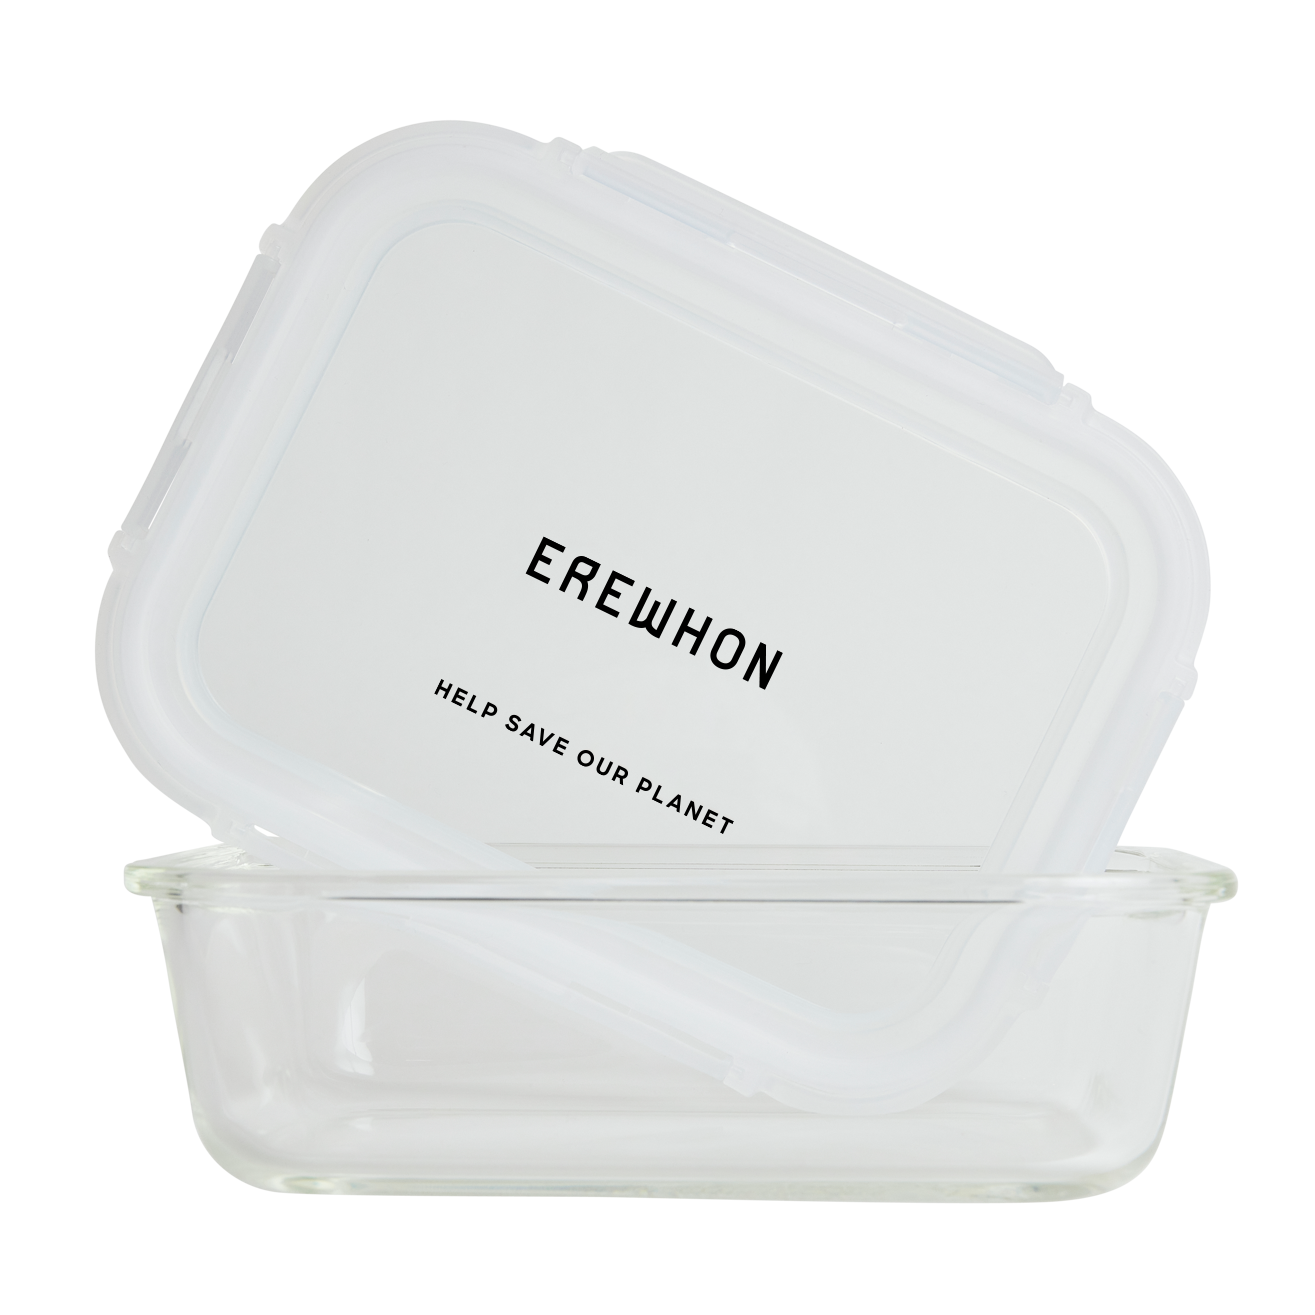 Erewhon -Erewhon Large Glass Storage Containers